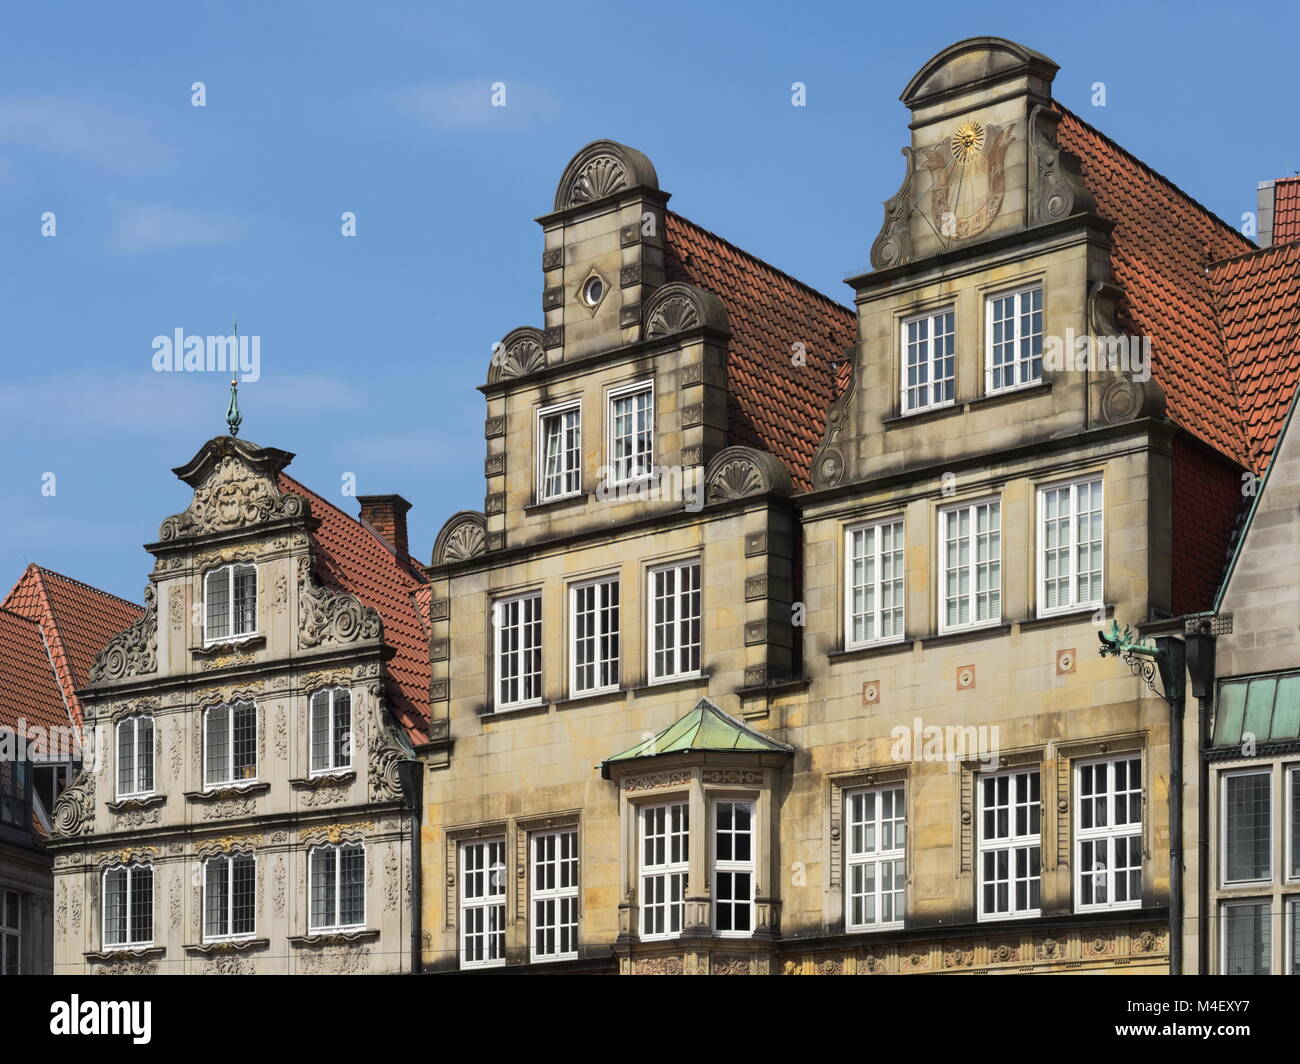 Bremen - Gabled houses on the market square, Germany Stock Photo